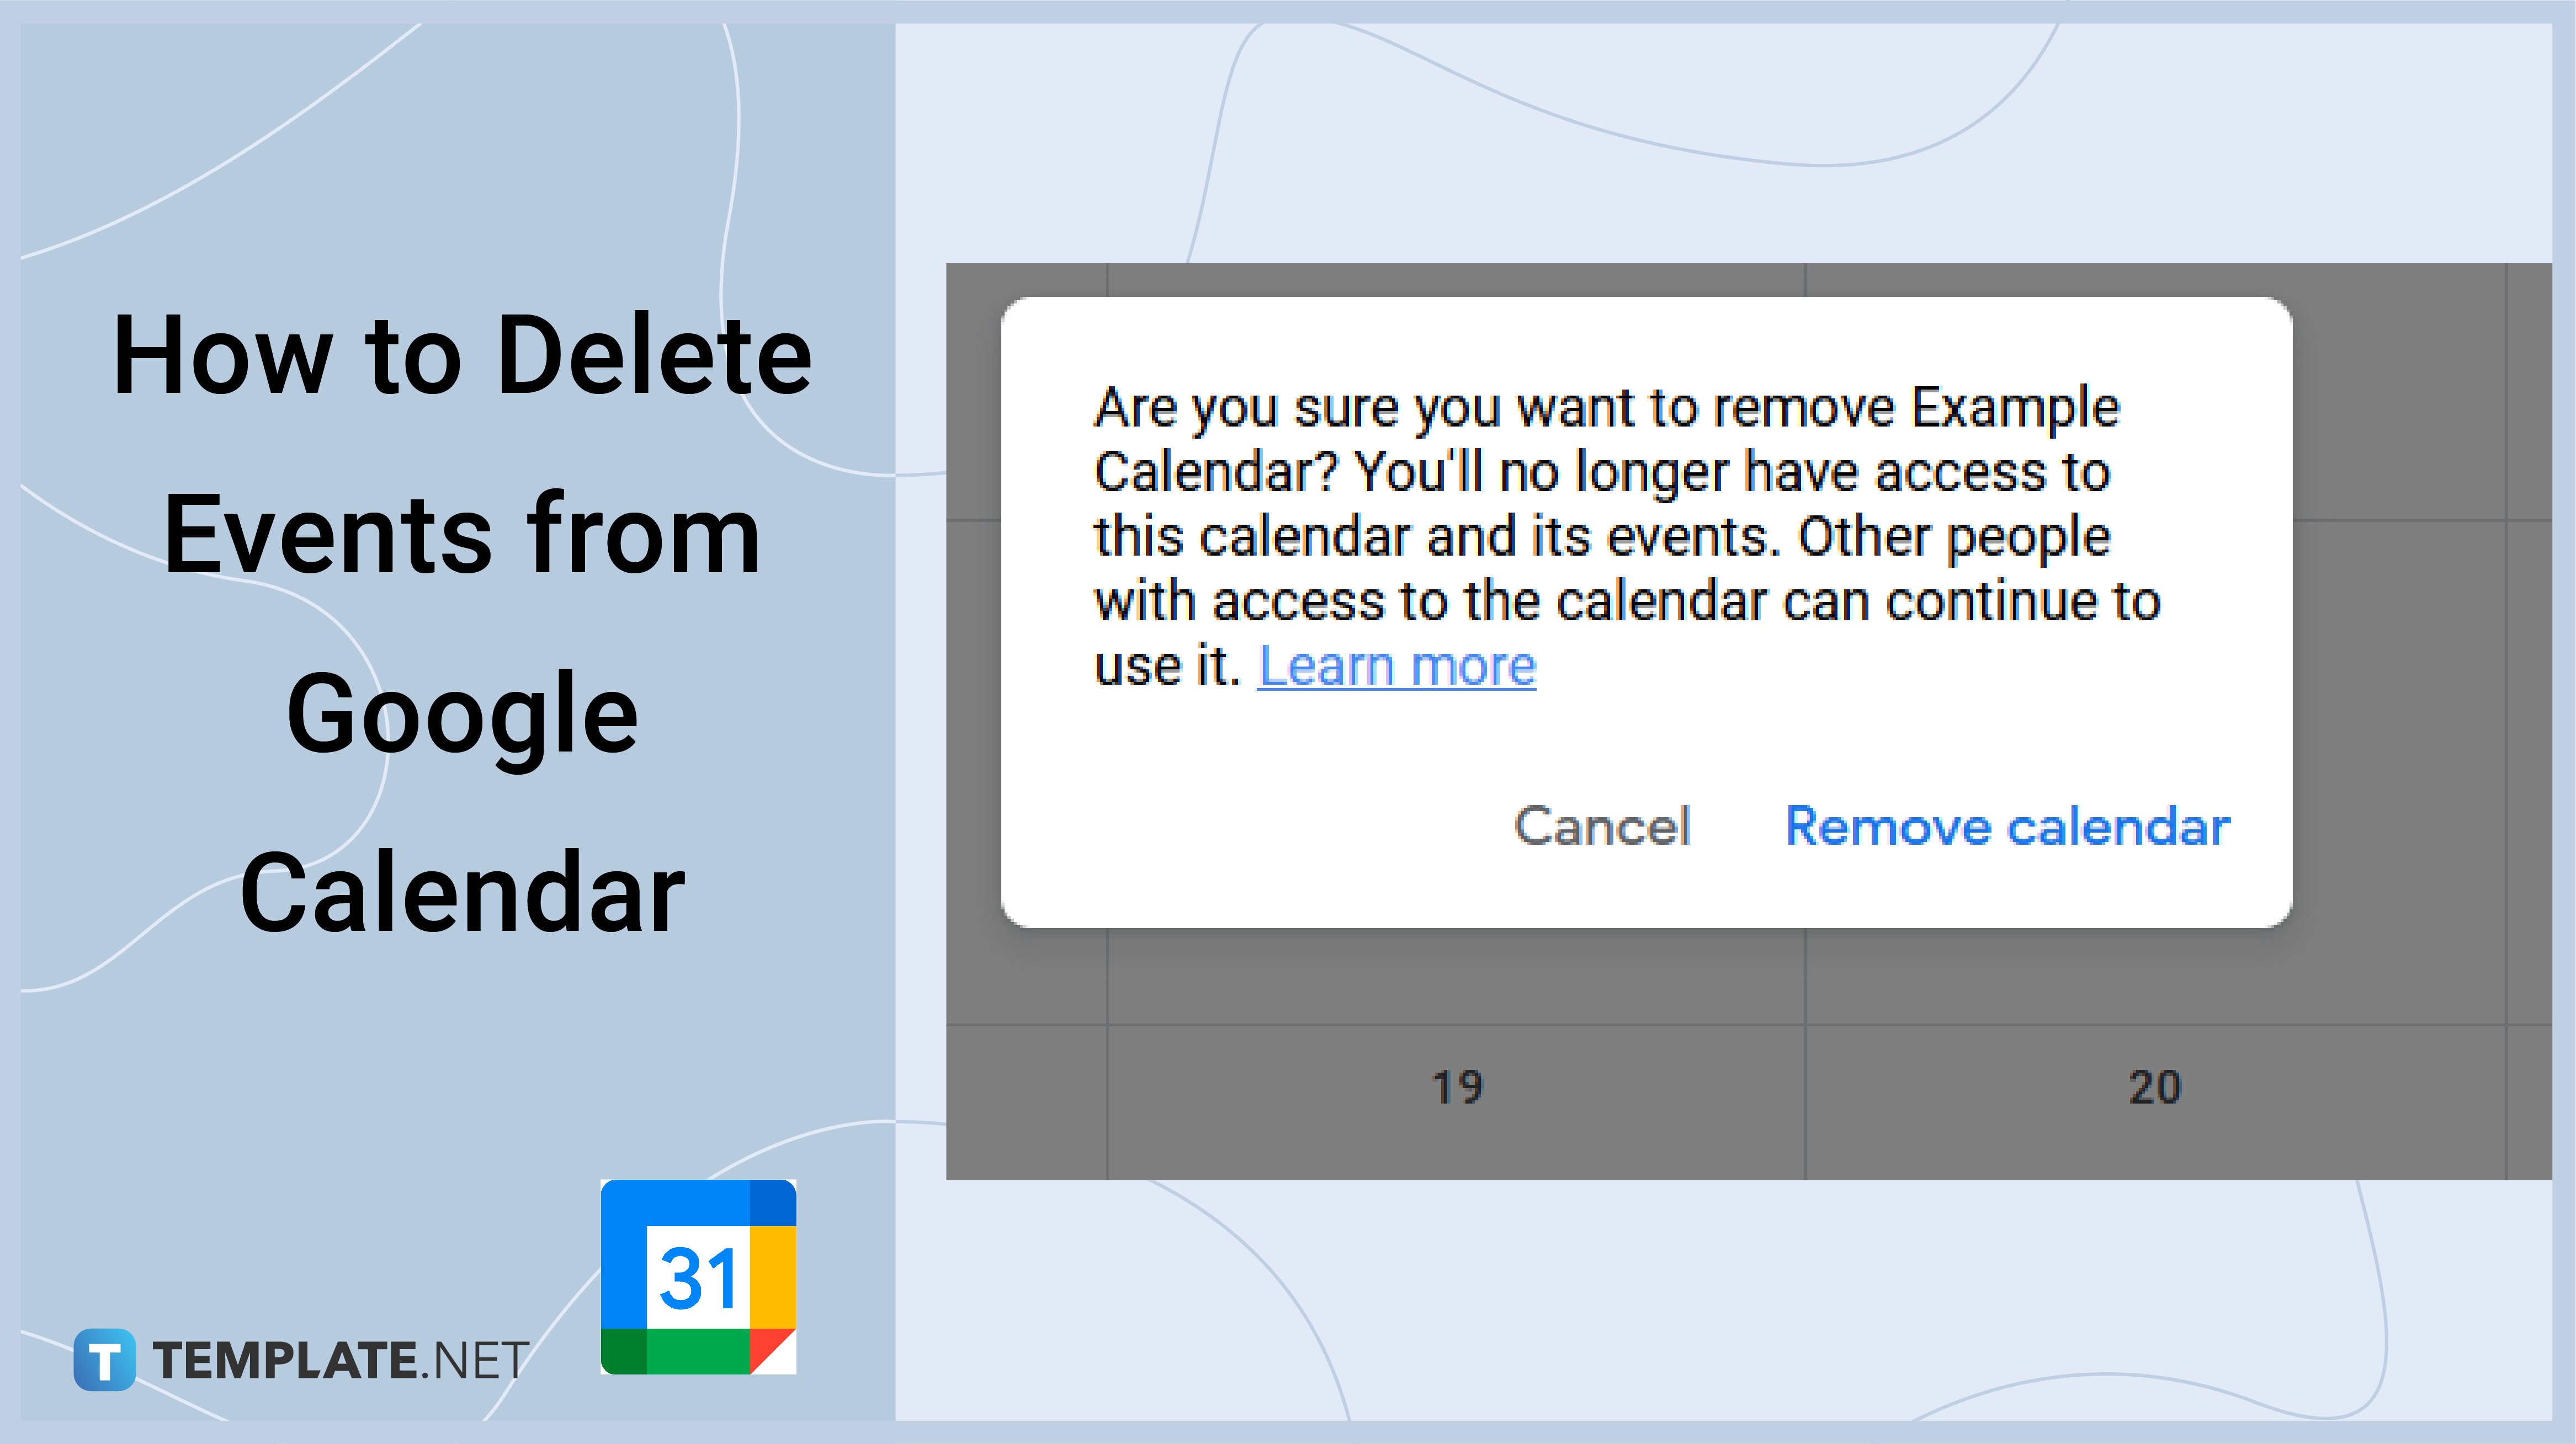 How to Delete Events from Google Calendar